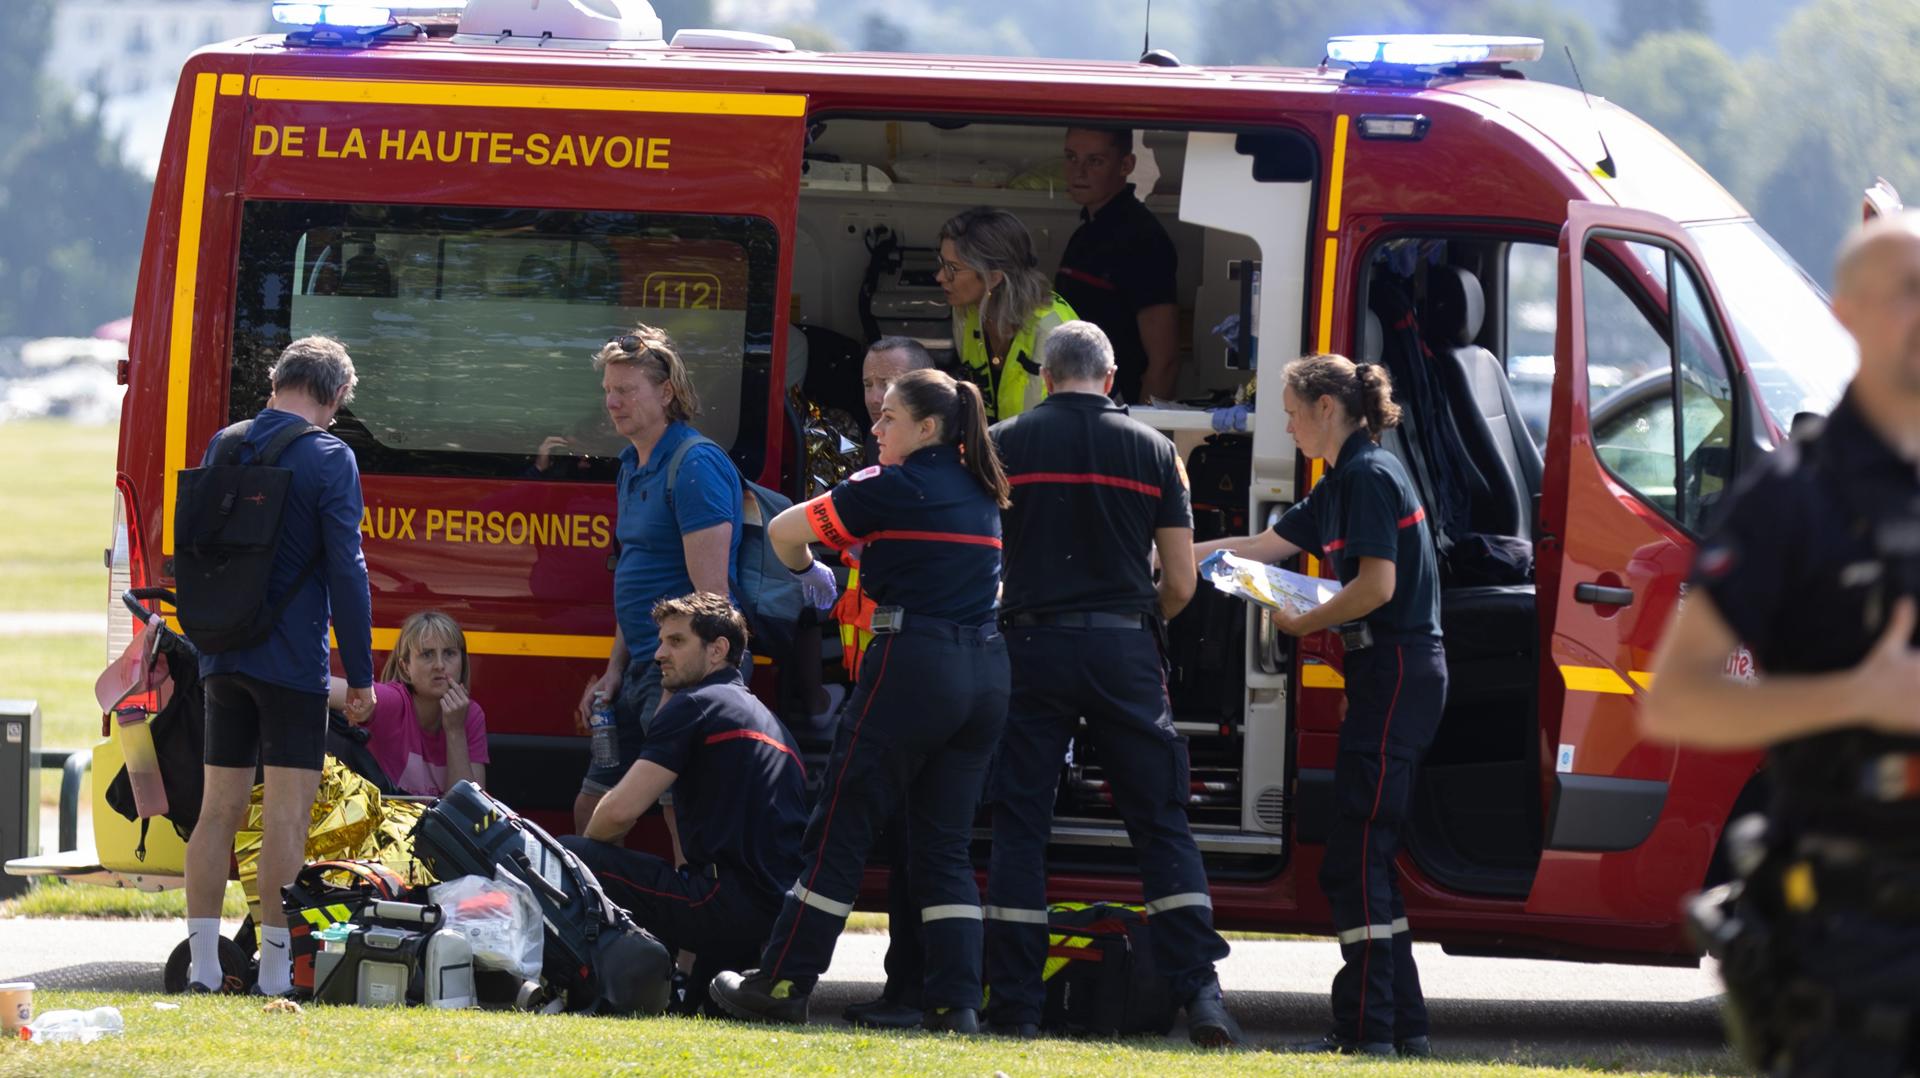 Emergency services gather at the scene of a knife attack in Annecy, France, 08 June 2023. EFE/EPA/GREGORY YETCHMENIZA FRANCE OUT/NO SALES NO SALES